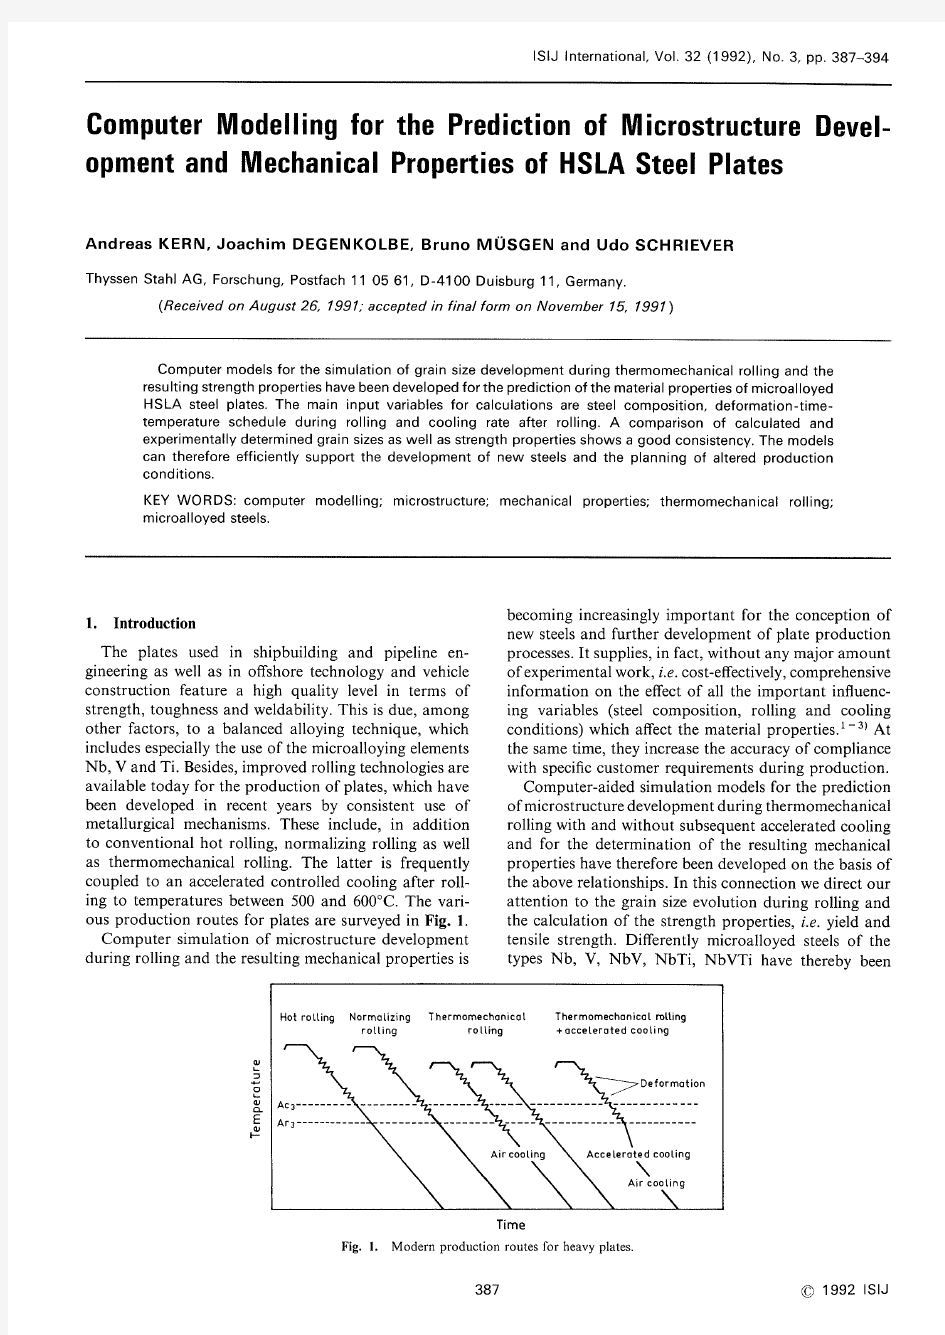 Computer Modelling for the Prediction of Microstructure Development and Mechanical Properties